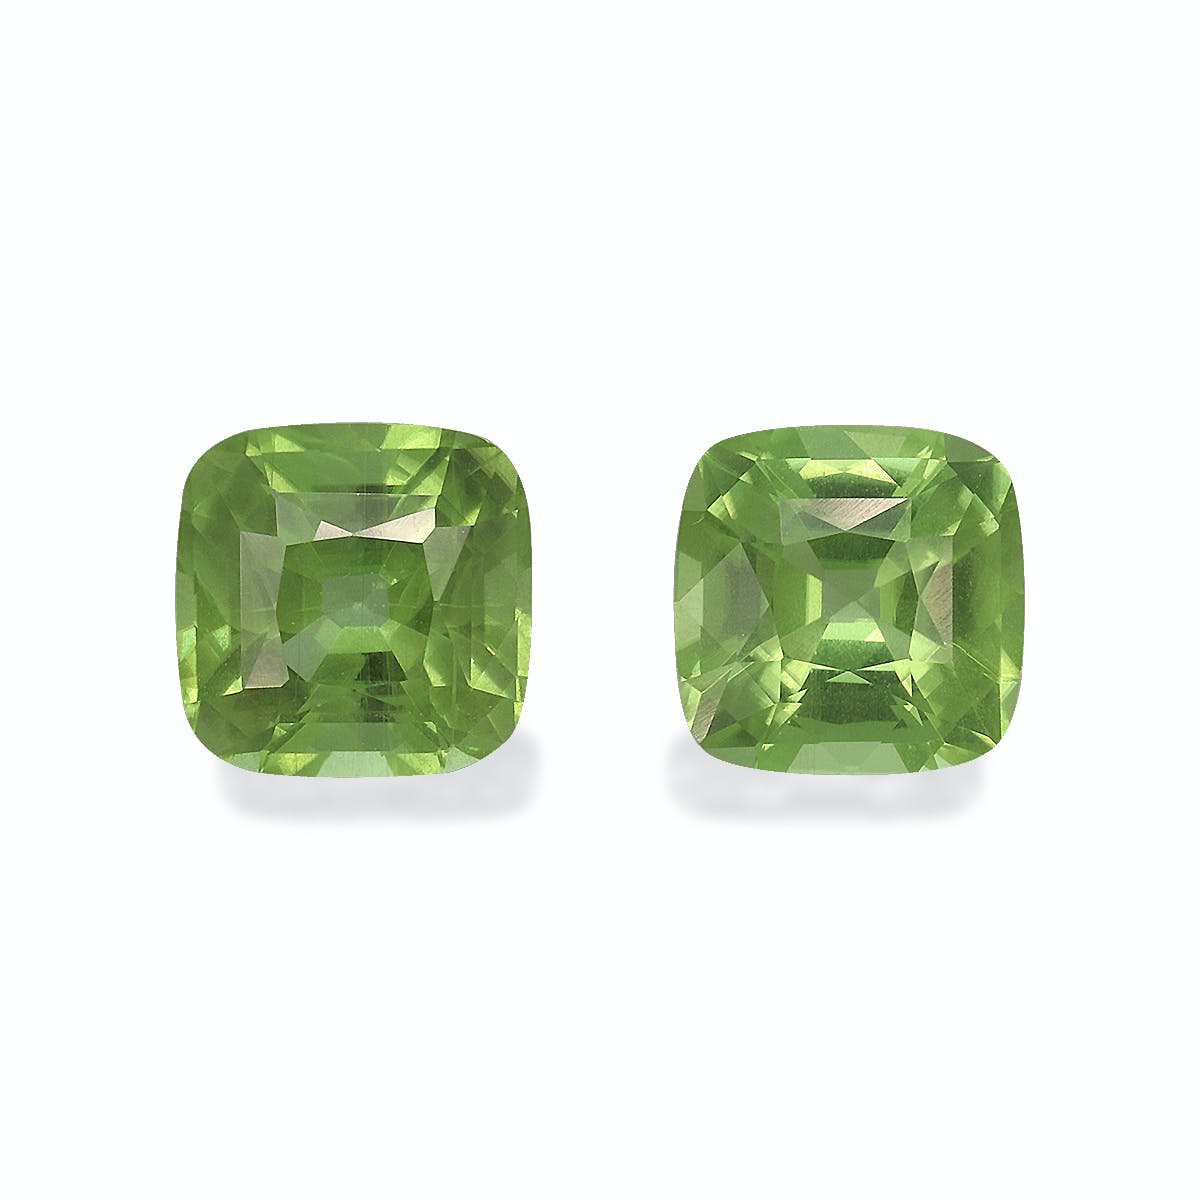 Picture of Green Peridot 5.20ct - 8mm Pair (PD0132)